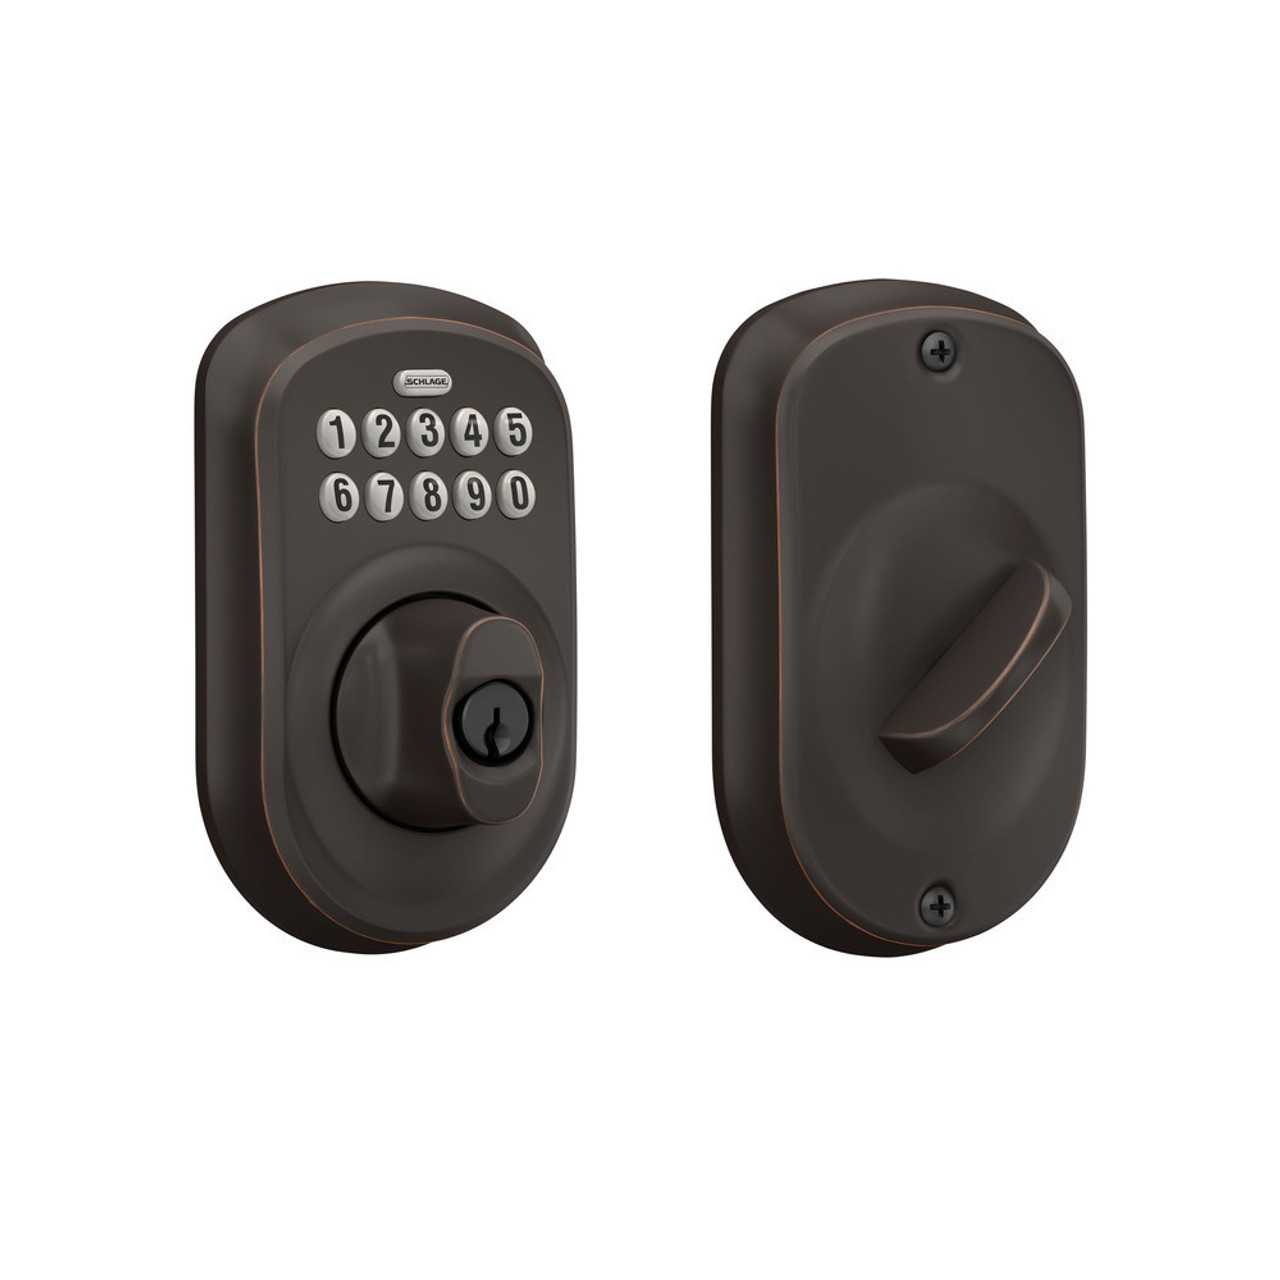 SCHLAGE BE365F SCHLAGE Electronic Keypad Deadbolt 3 Hour Fire Rated UL